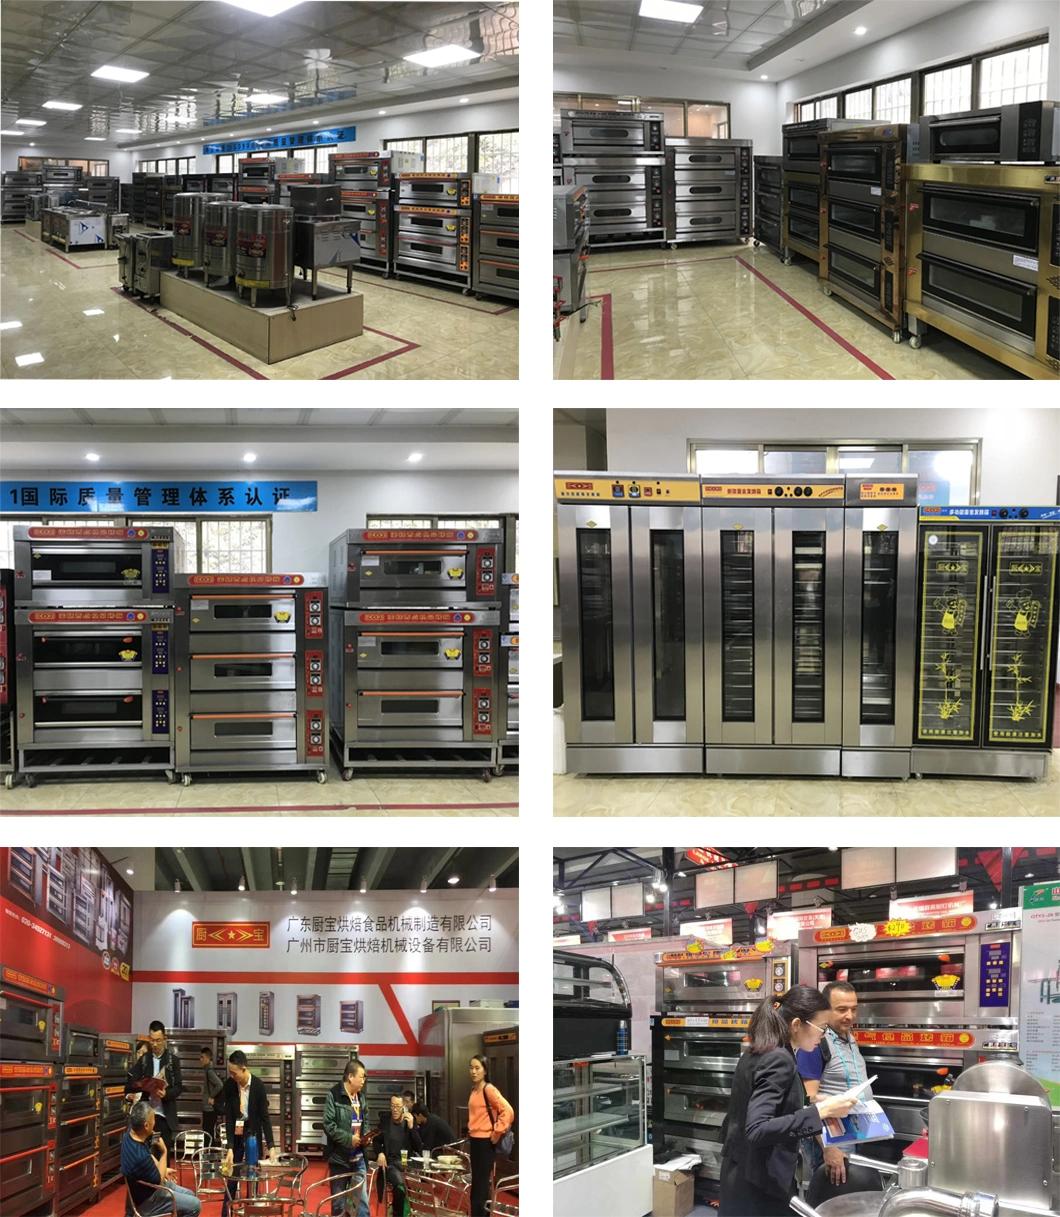 Commercial Kitchen 3 Deck 6 Trays Luxury Electric Oven for Baking Bakery Machinery Food Equipment with Computer Controller